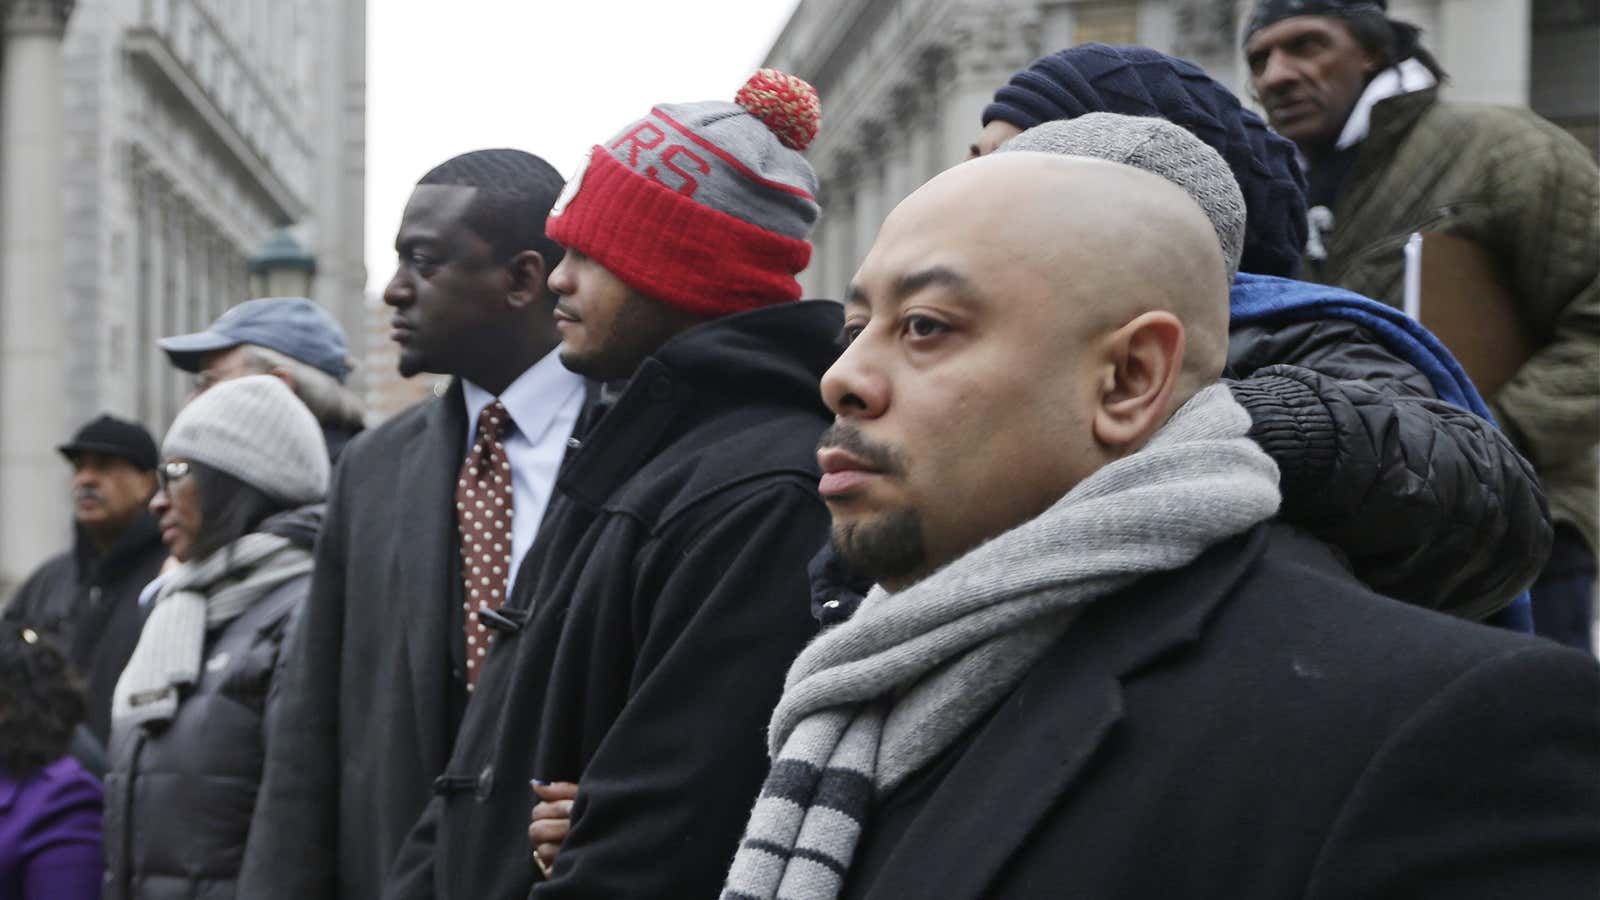 Raymond Santana, right, with other members of the Central Park Five in 2013.